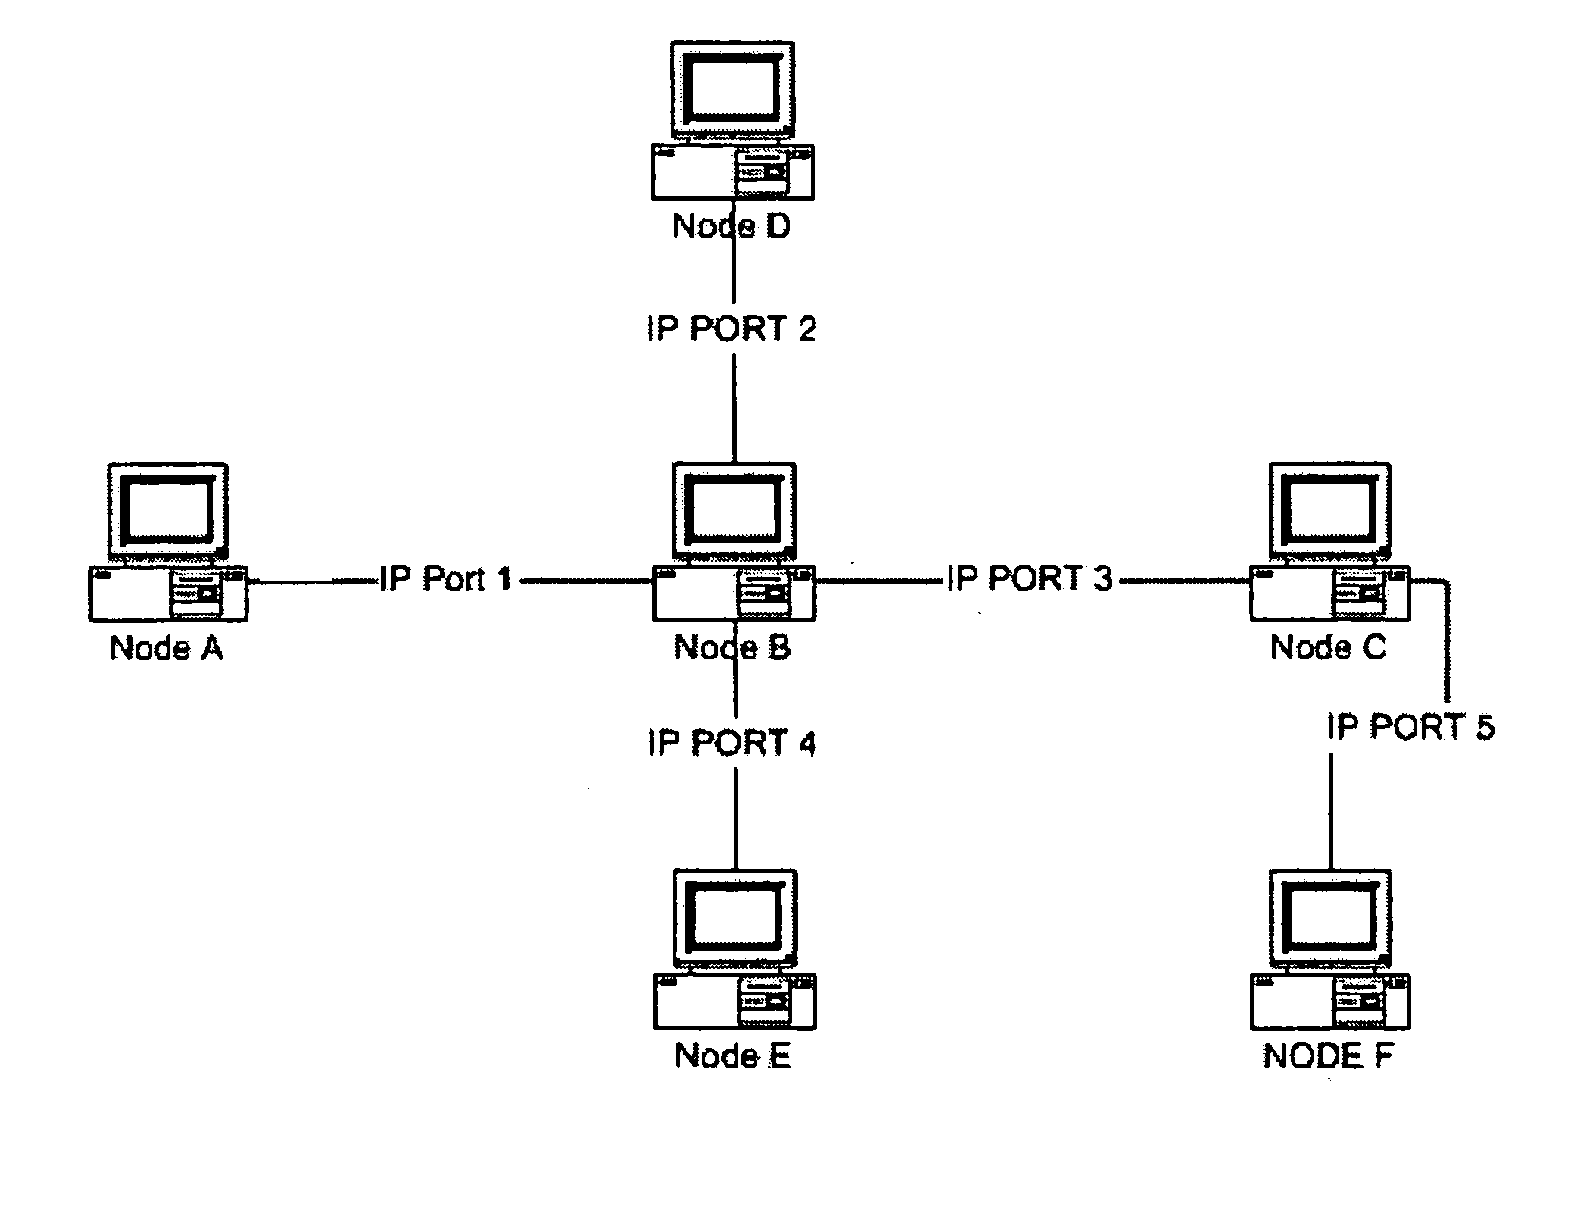 Method for monitoring and providing information over a peer to peer network